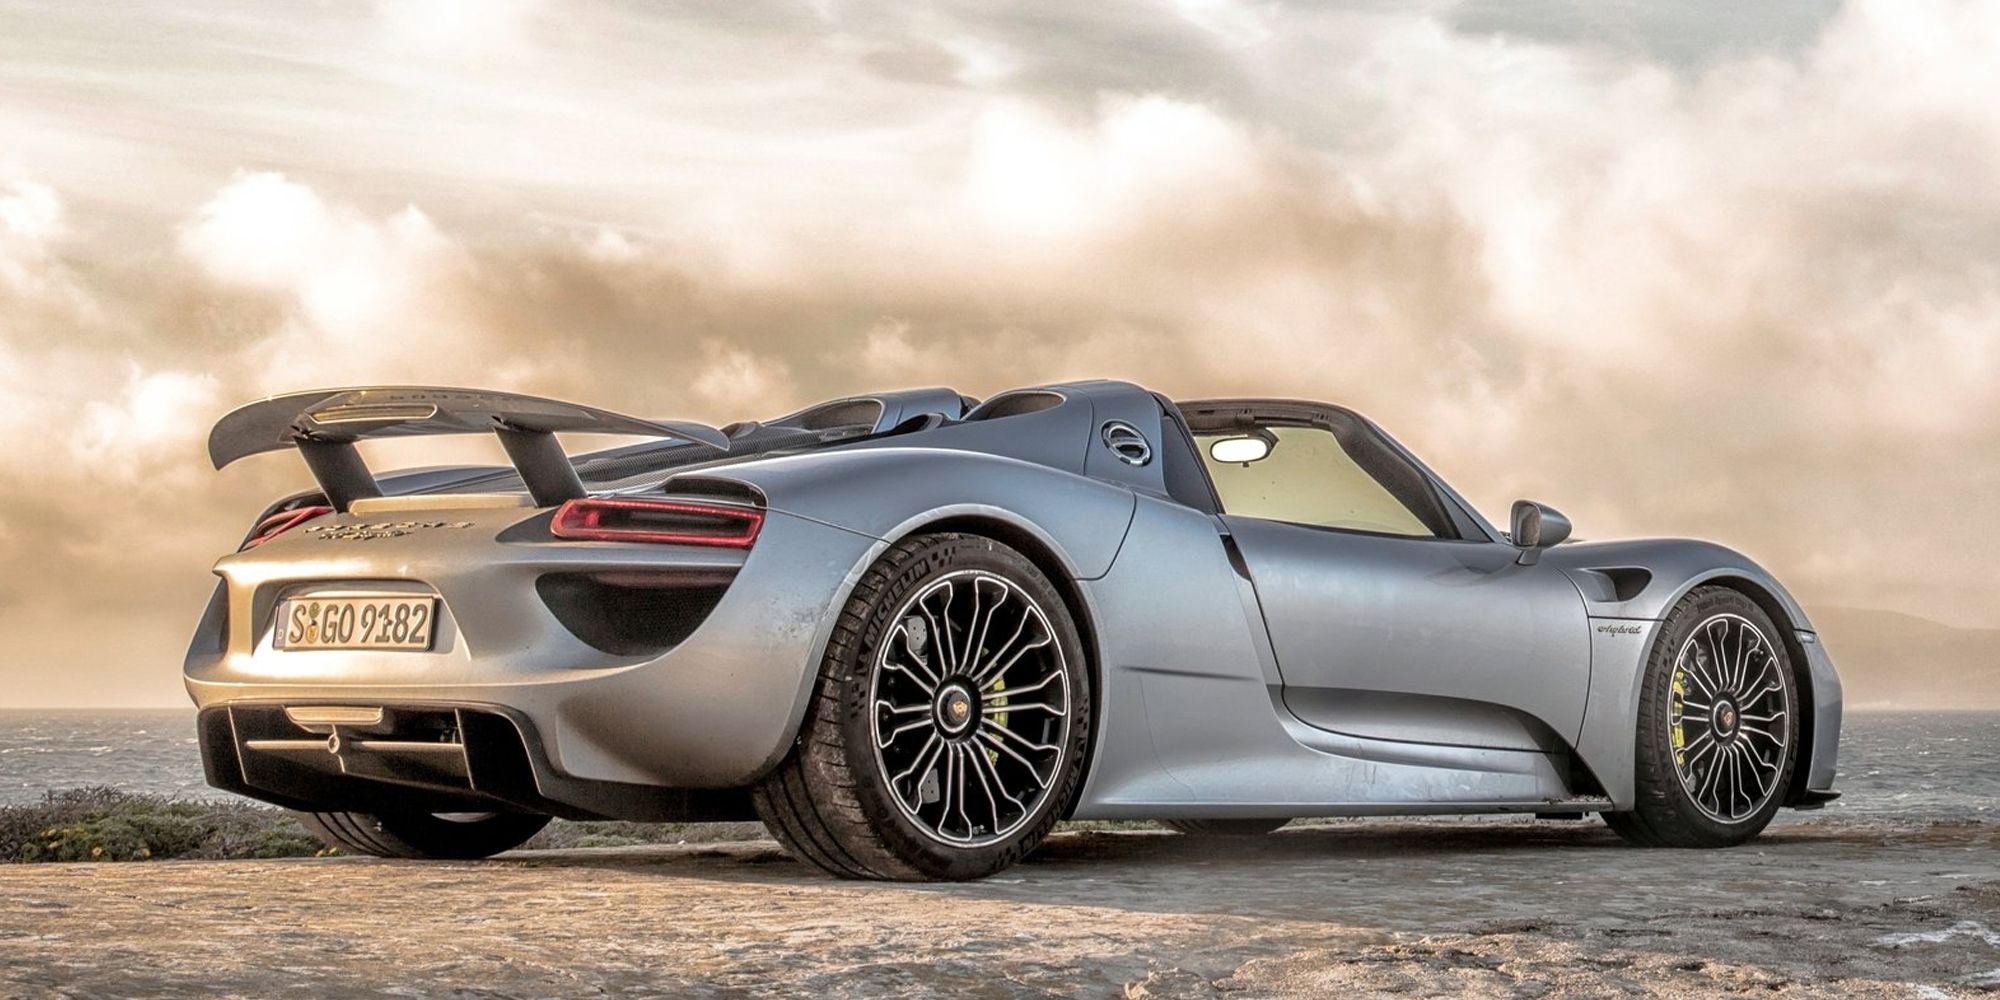 Rear 3/4 view of a silver 918 Spyder